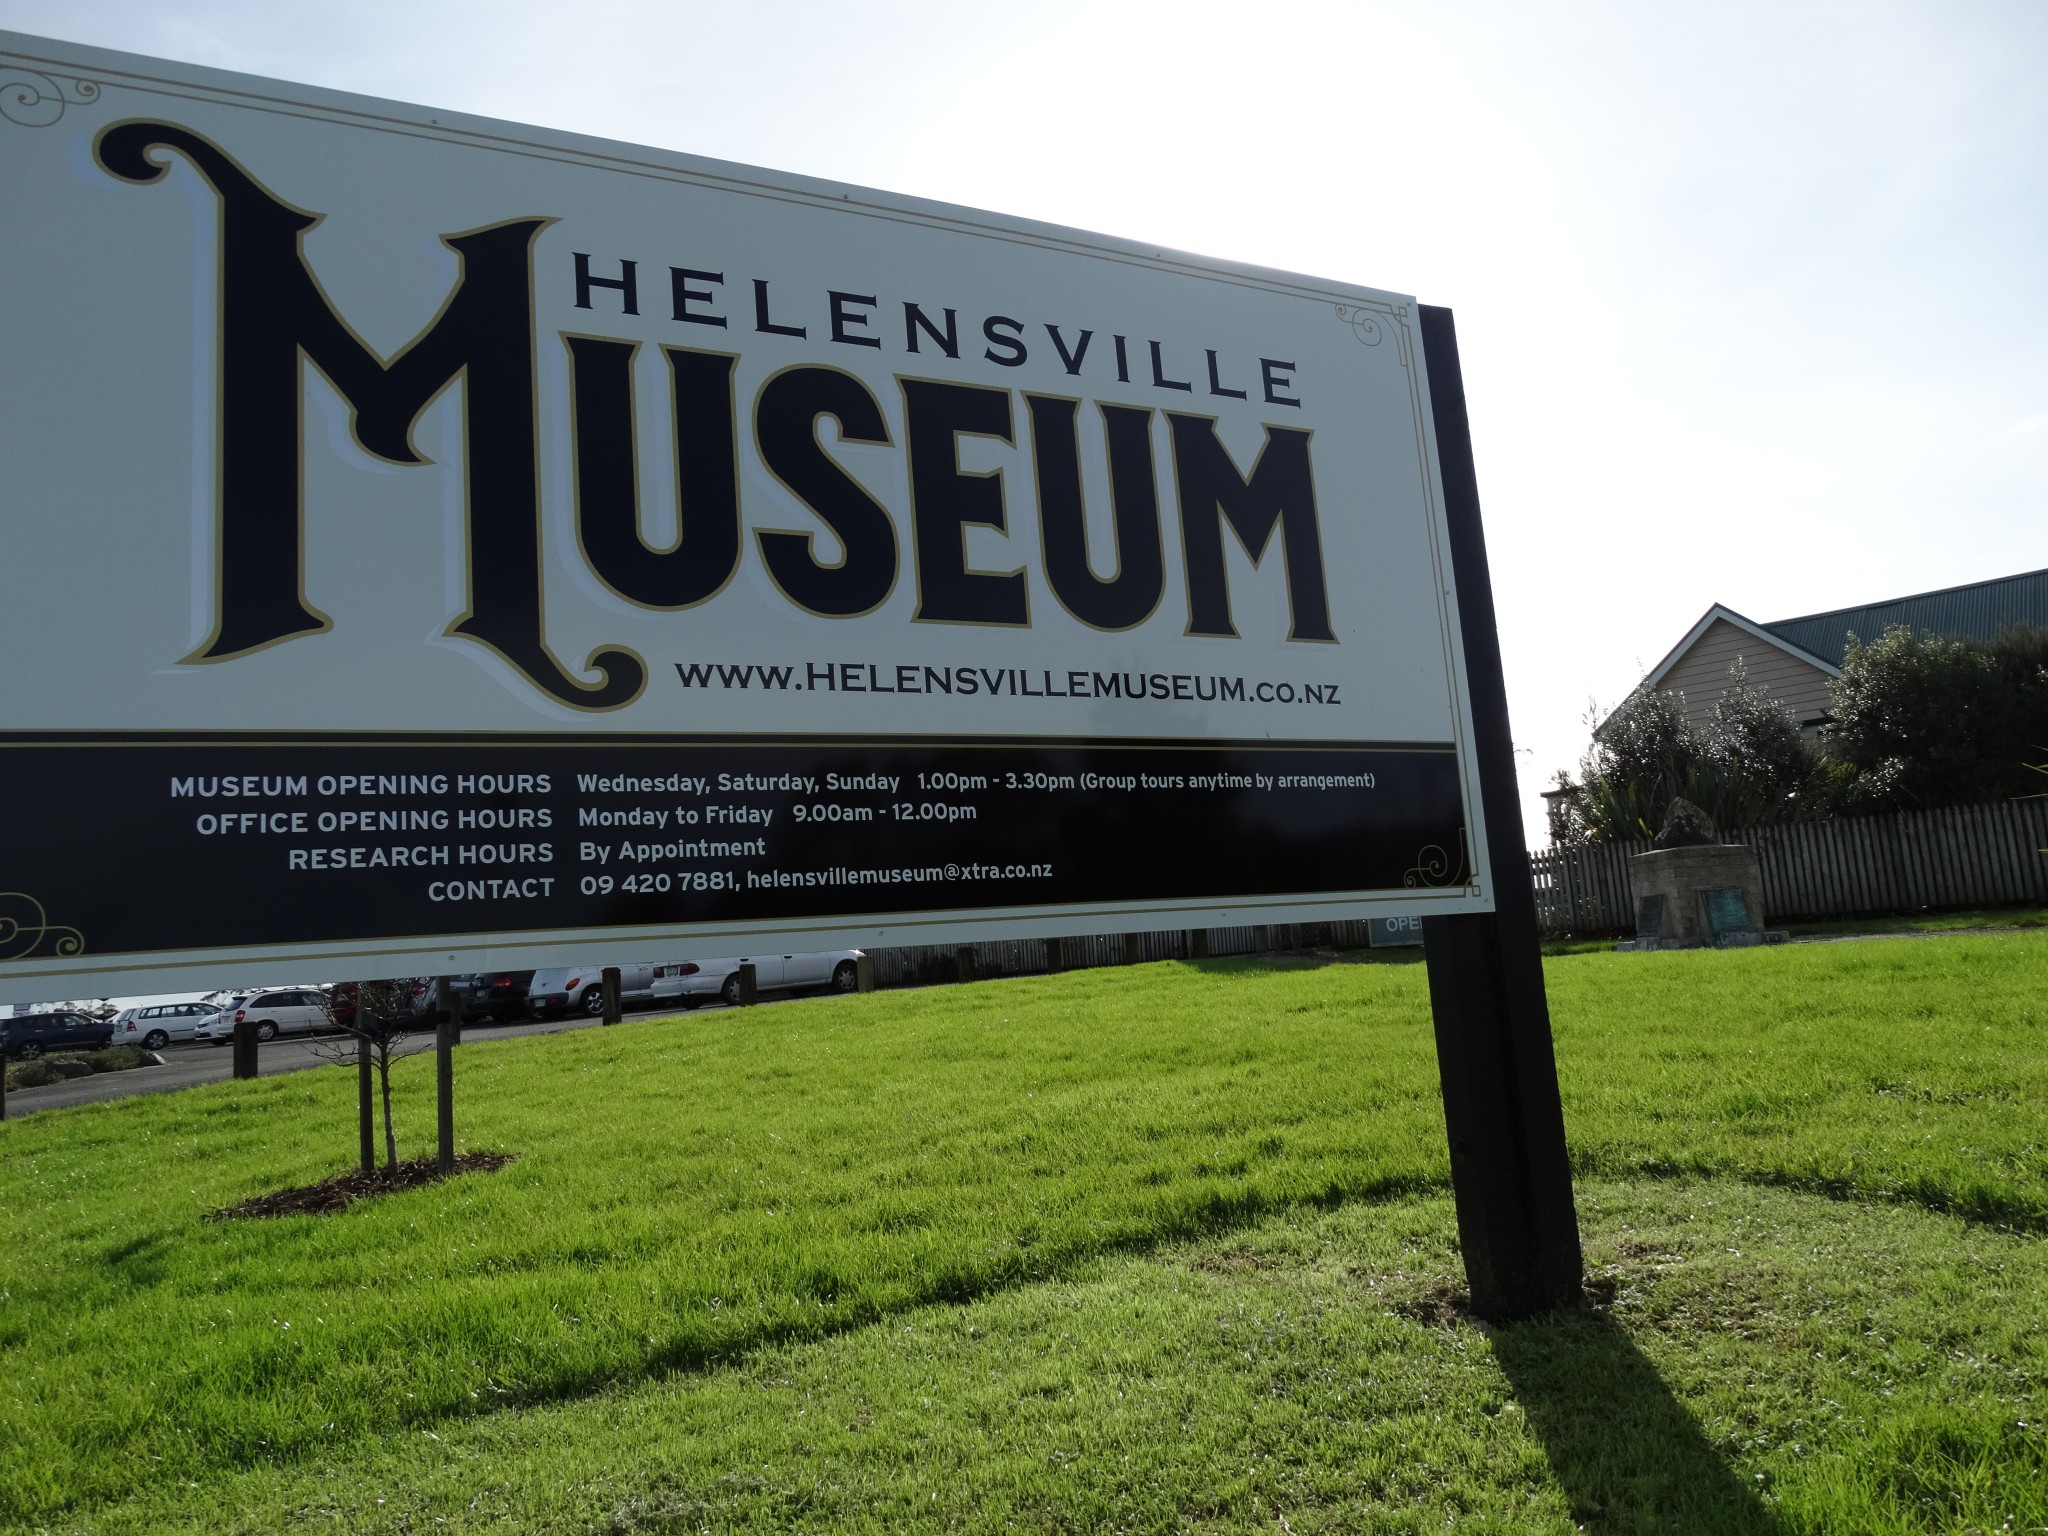 Helensville Museum – Exploratory first session